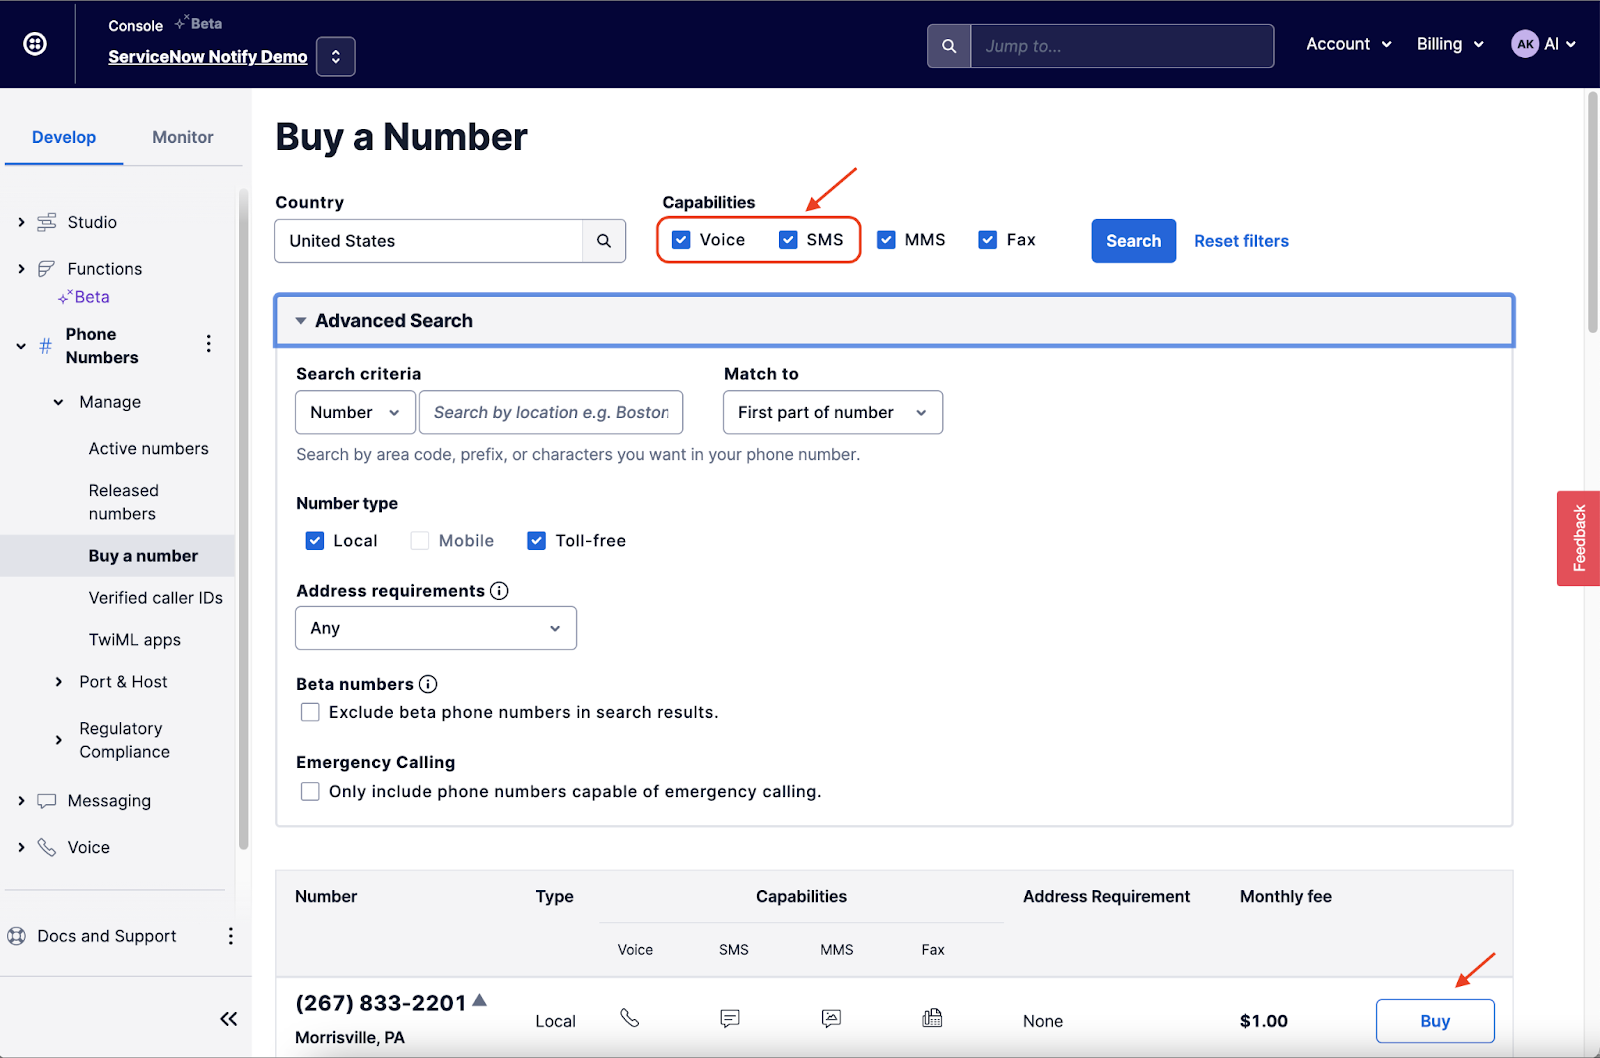 A screenshot of the Buy a Number section of the Twilio Console